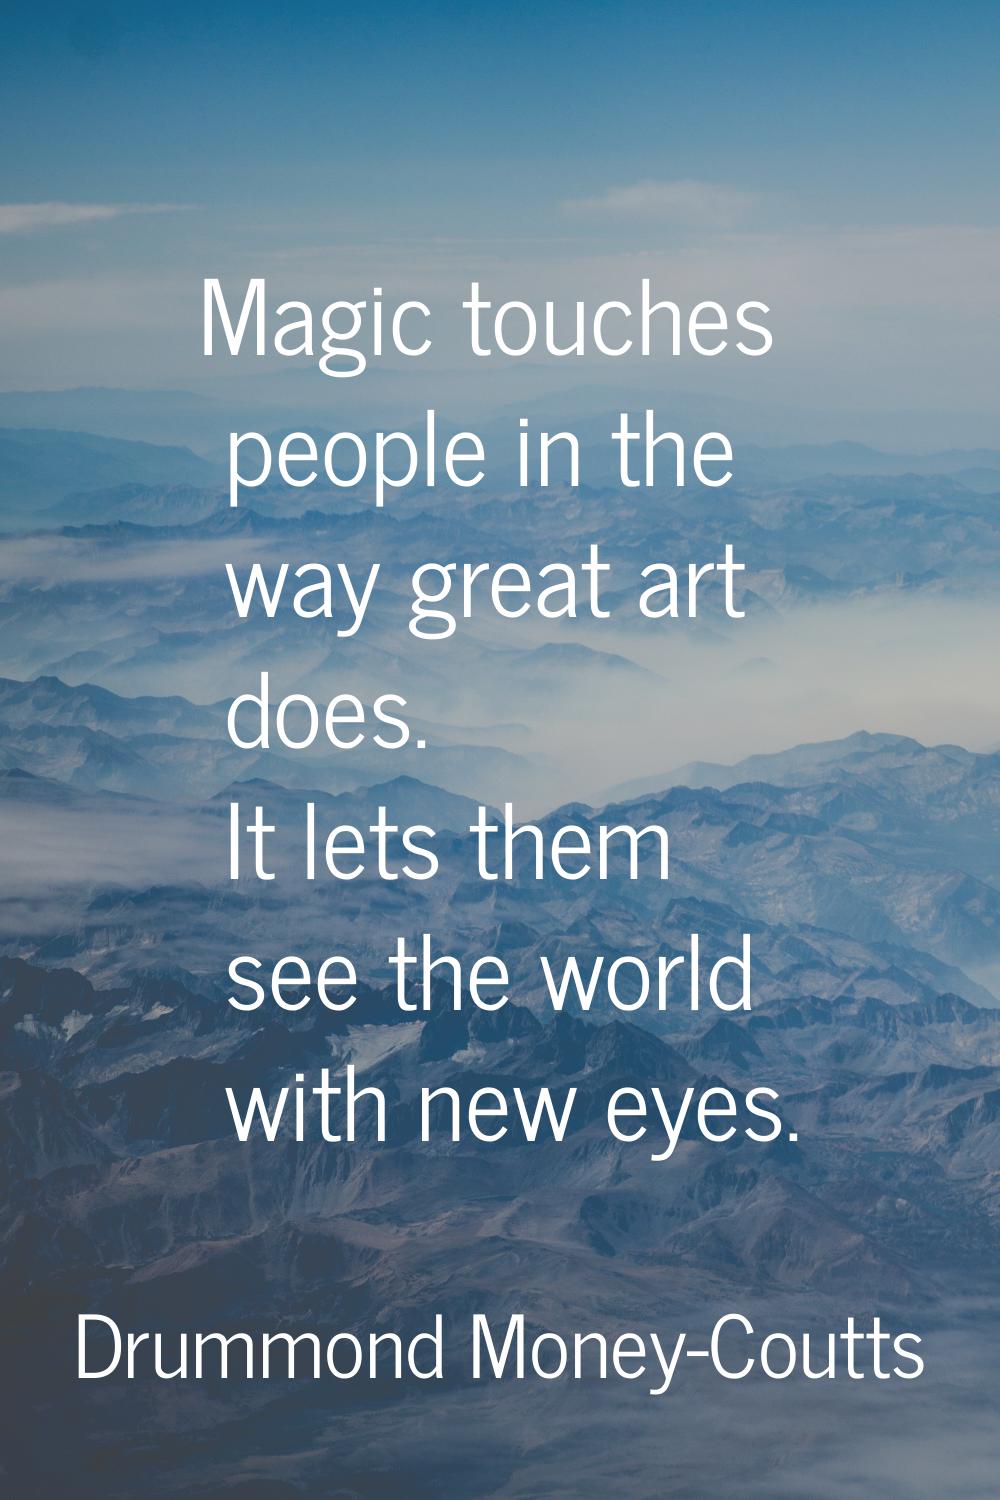 Magic touches people in the way great art does. It lets them see the world with new eyes.